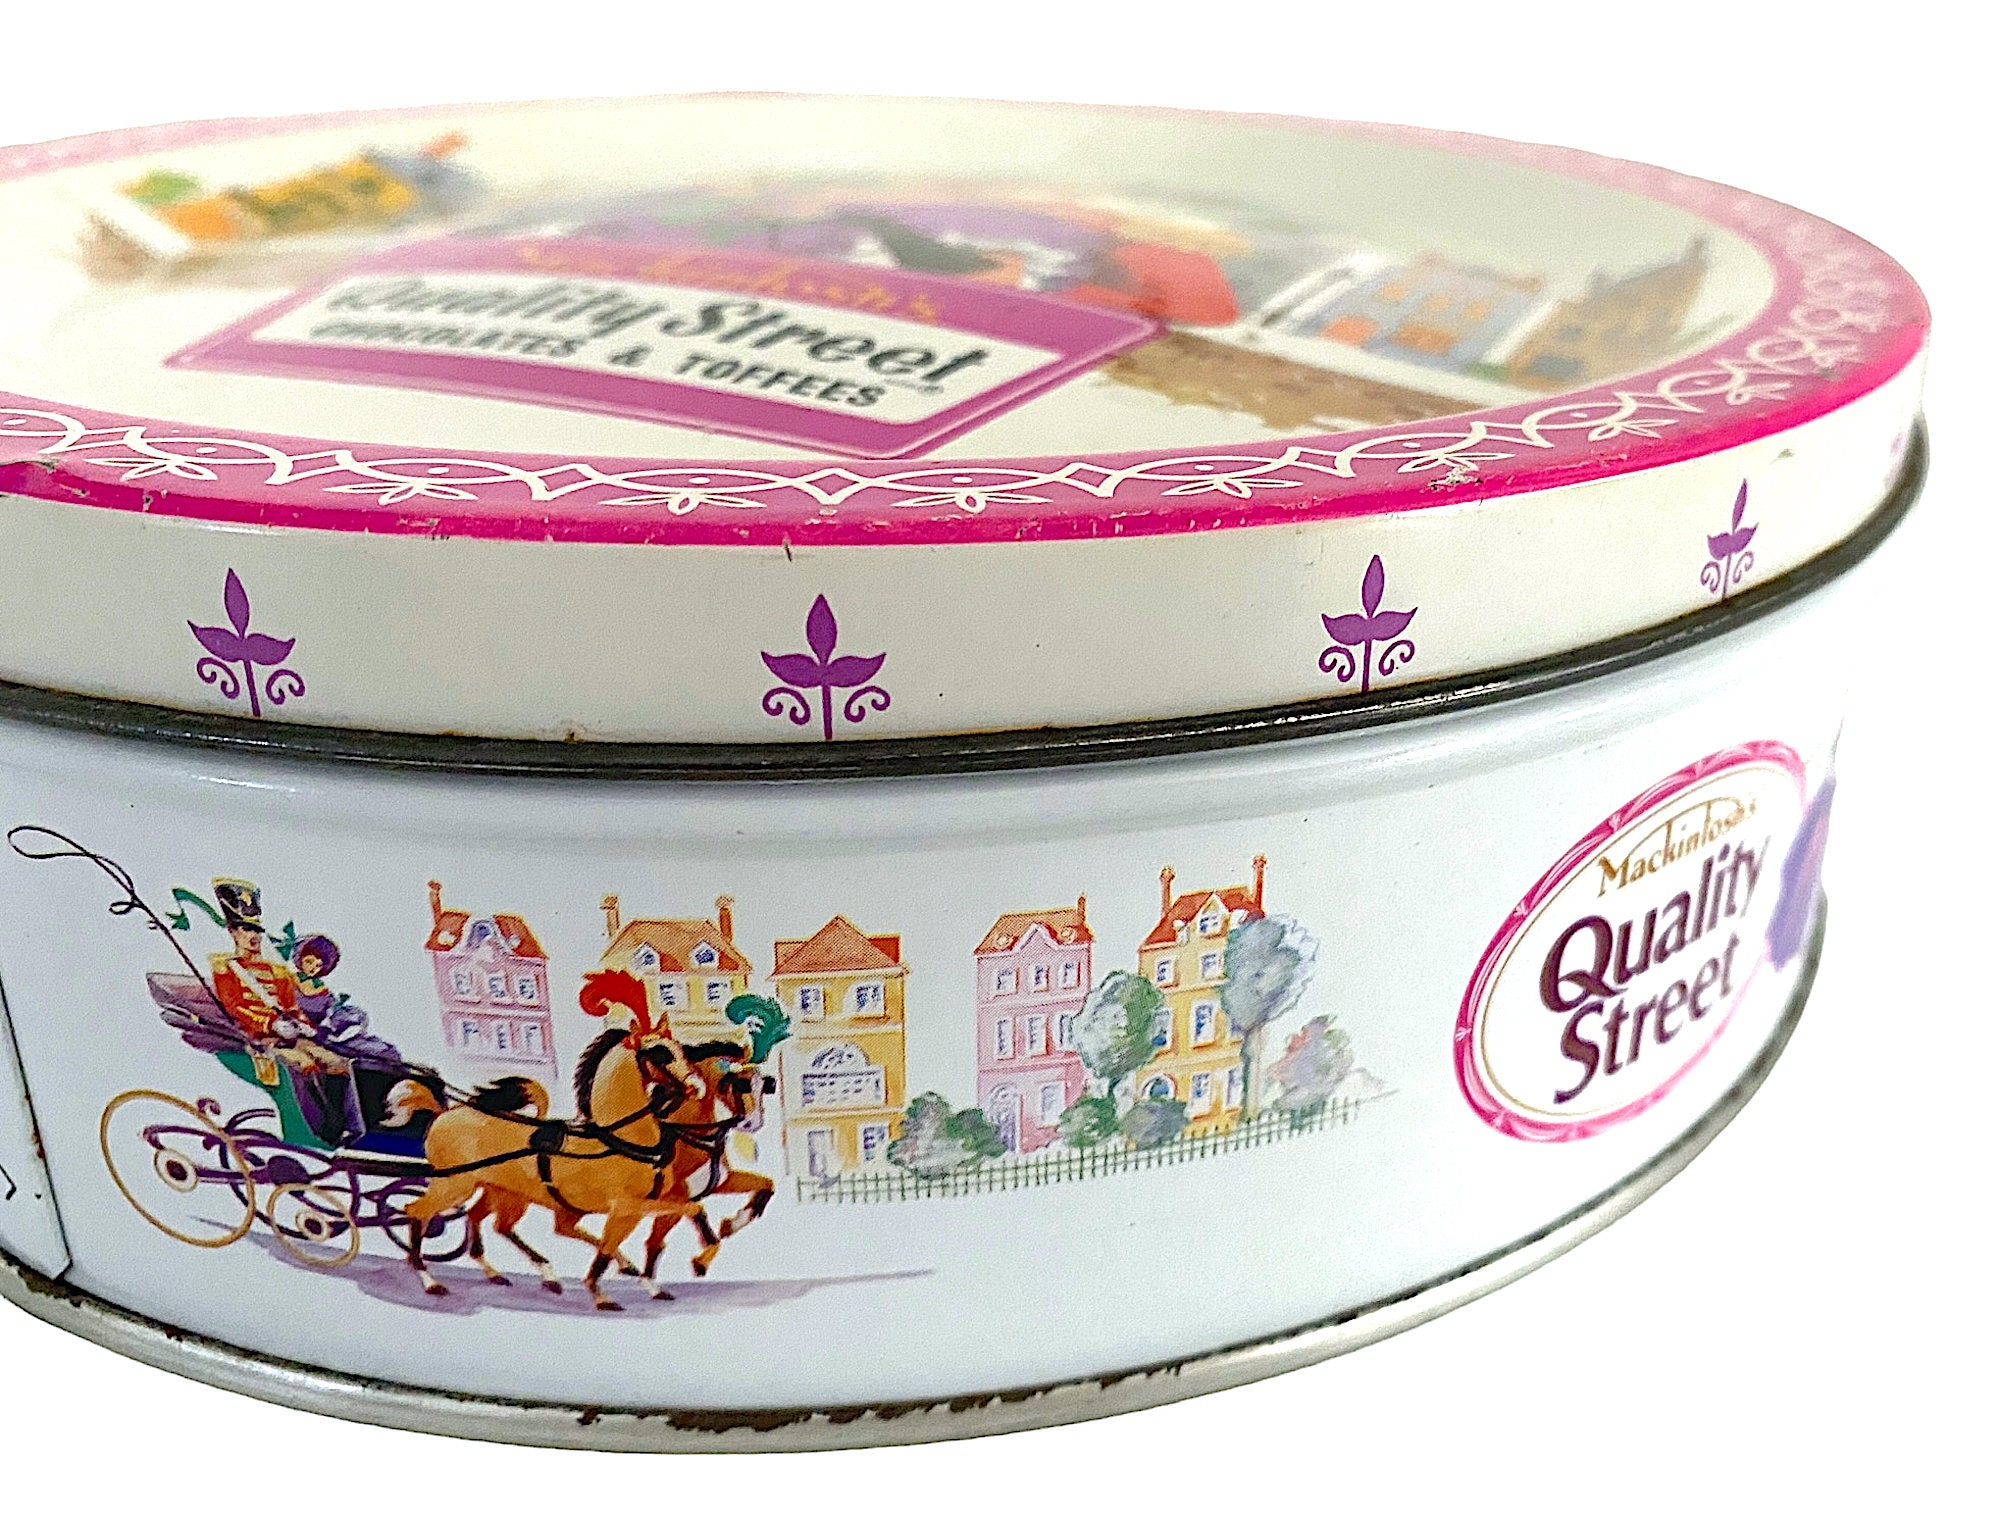 Darning Kit Vintage Quality Street Tin Filled With a Vintage Pink